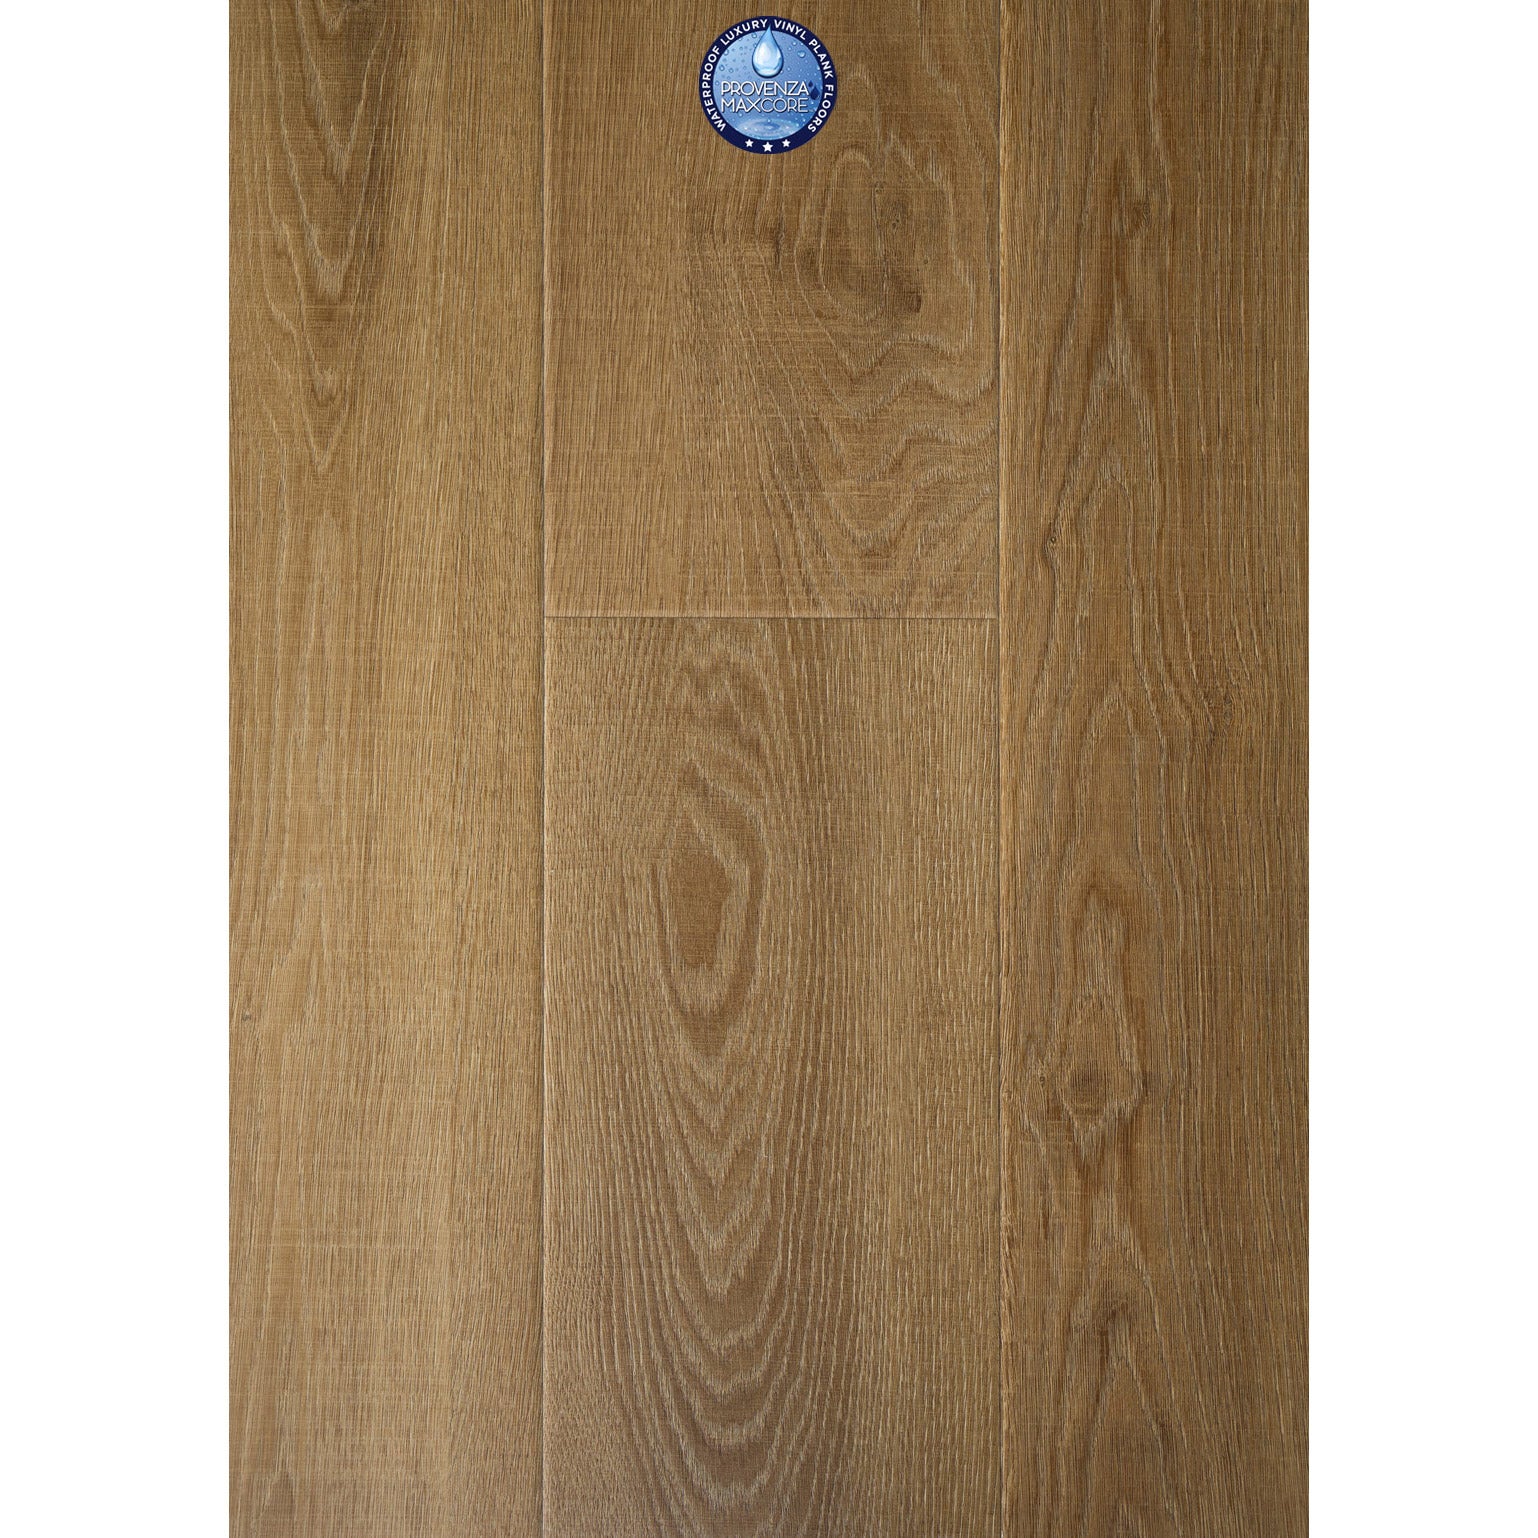 Provenza Floors - New Wave - 8.75 in. x 72 in. Rigid Core - Nest Egg